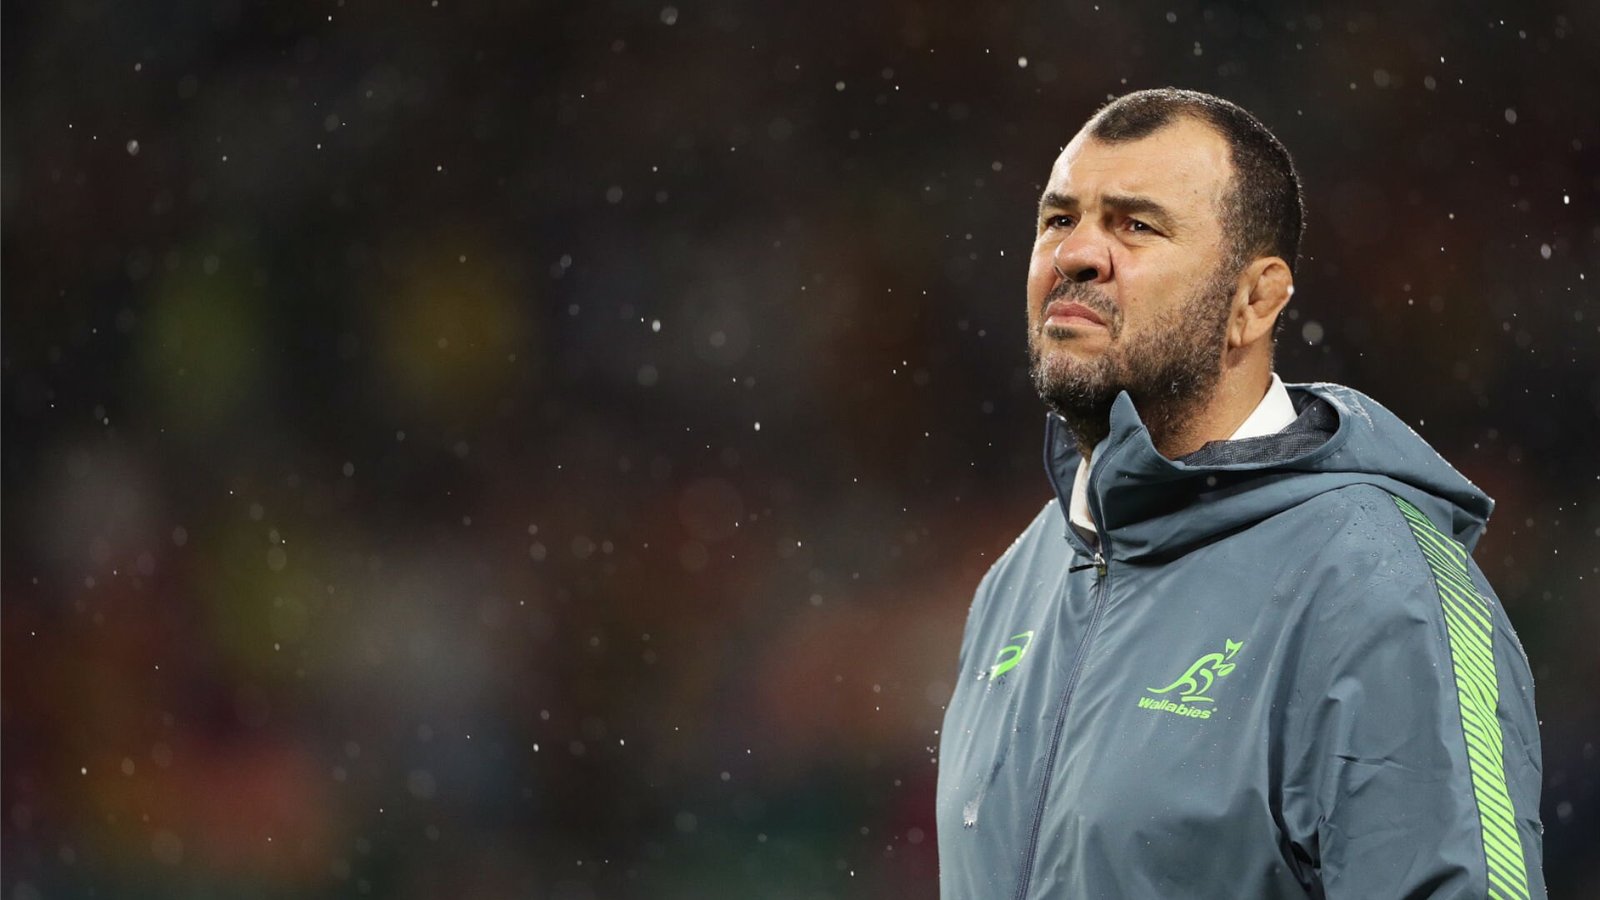 Phil Waugh on the potential return of Michael Cheika: 'Everyone's in the hunt'